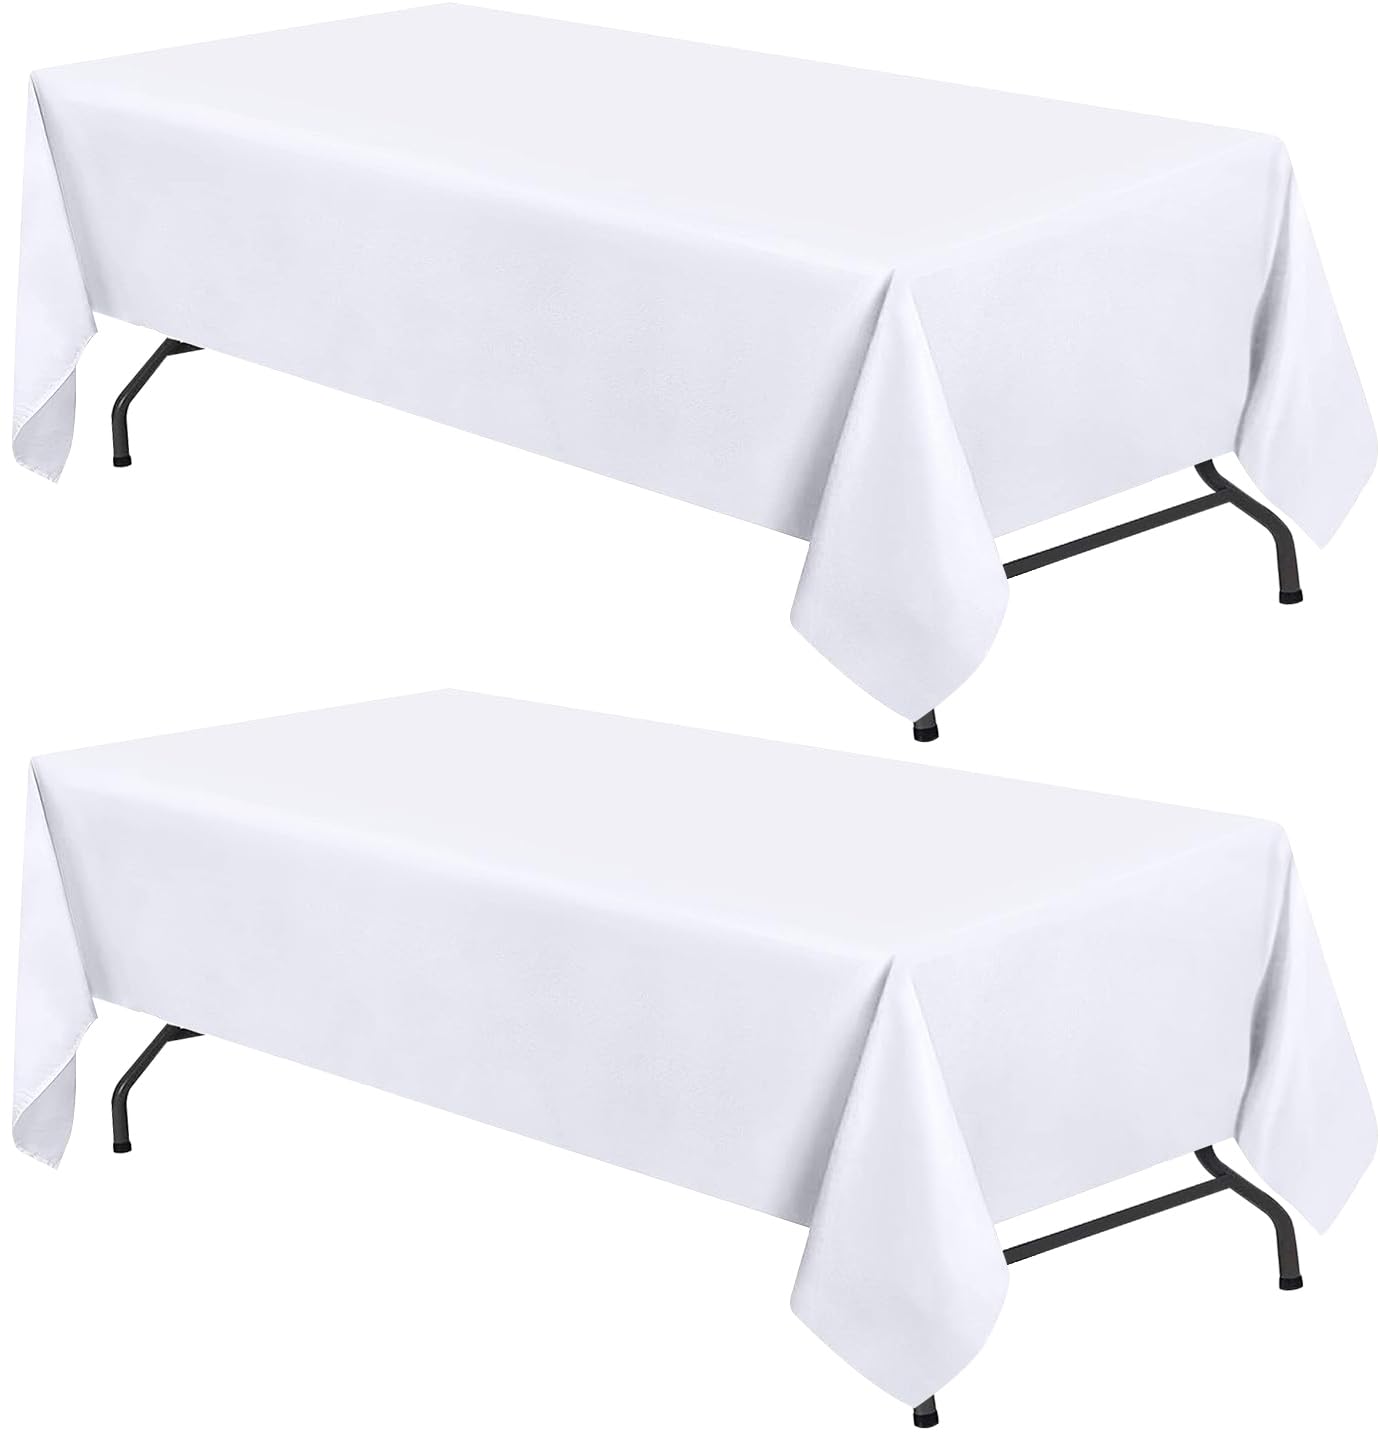 WEALUXE 2 Pack White Kitchen Table Cloth for Folding Table 4ft [ 60x84 in ] Rectangle Tablecloth Set, Stain and Wrinkle Resistant Washable Polyester Table Cover for Dinner Table, Wedding, Party  - Like New